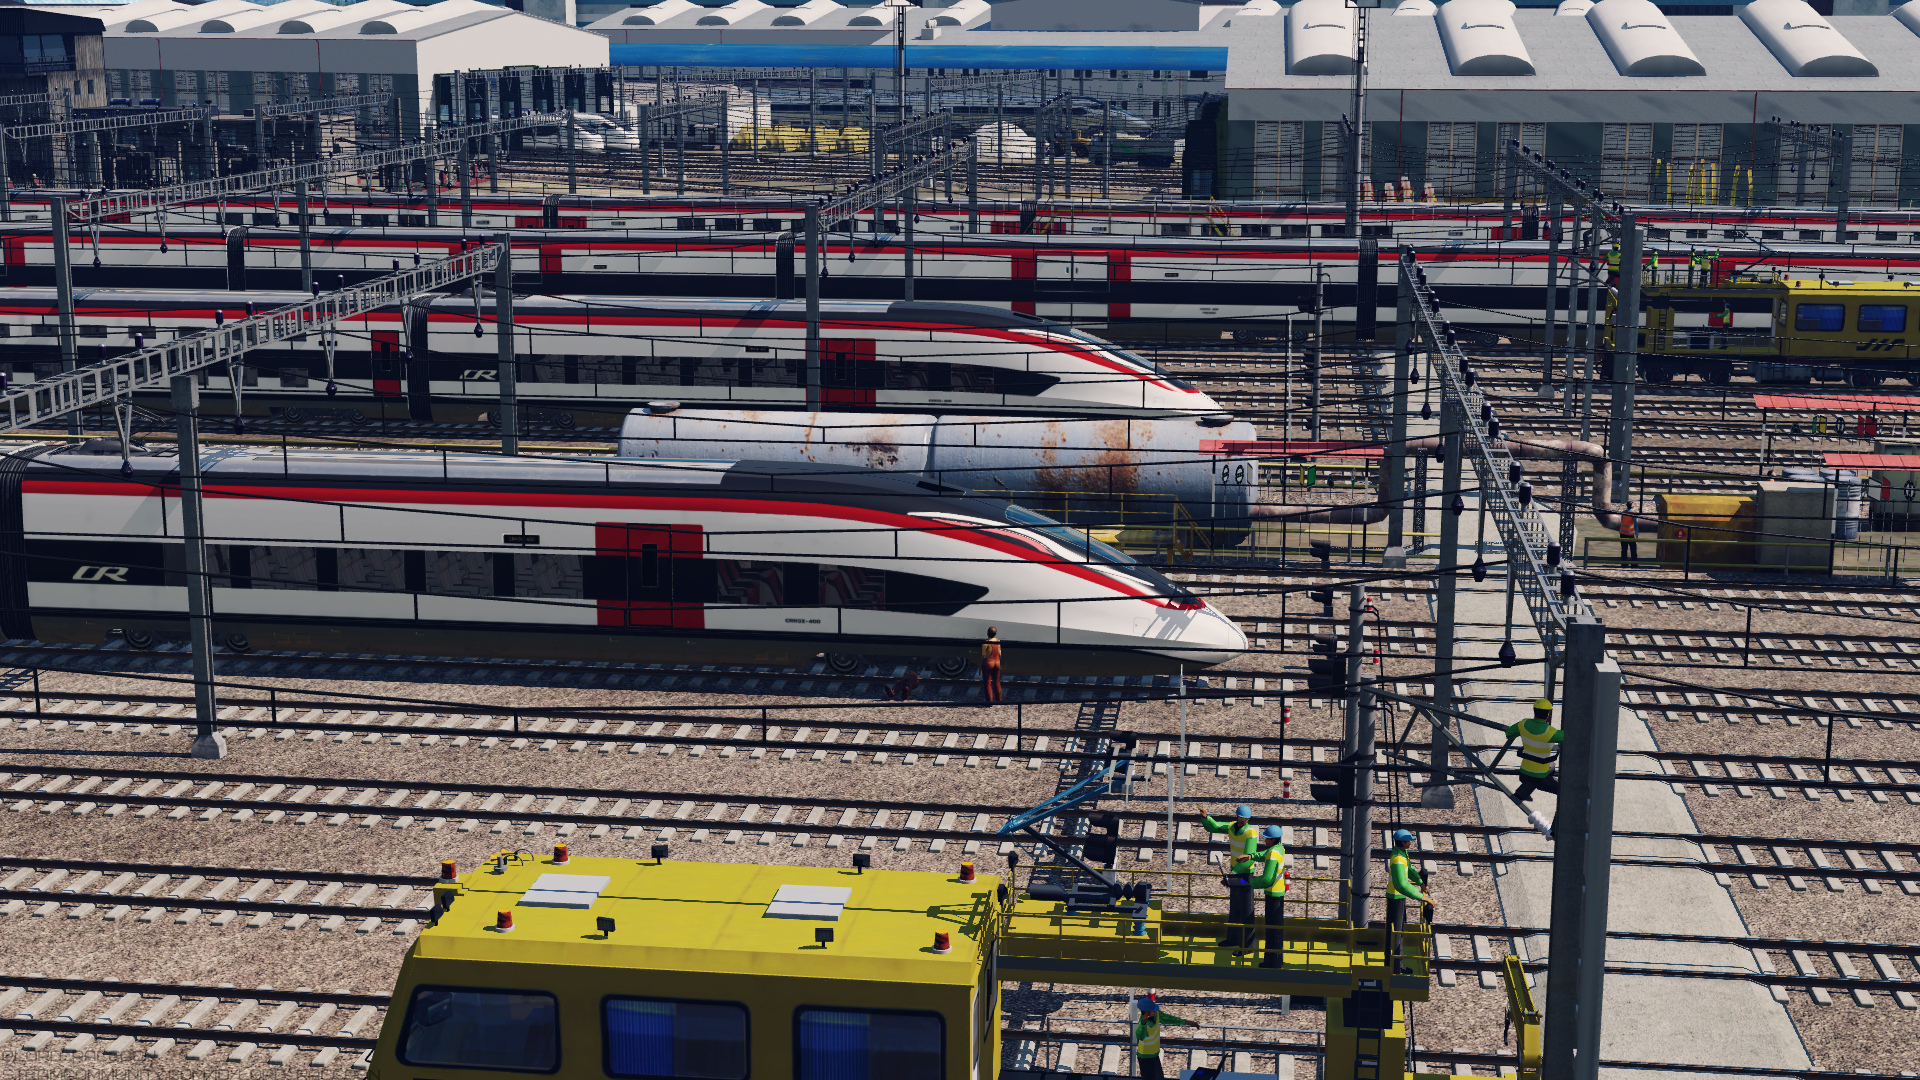 High-speed trains on the maintenance